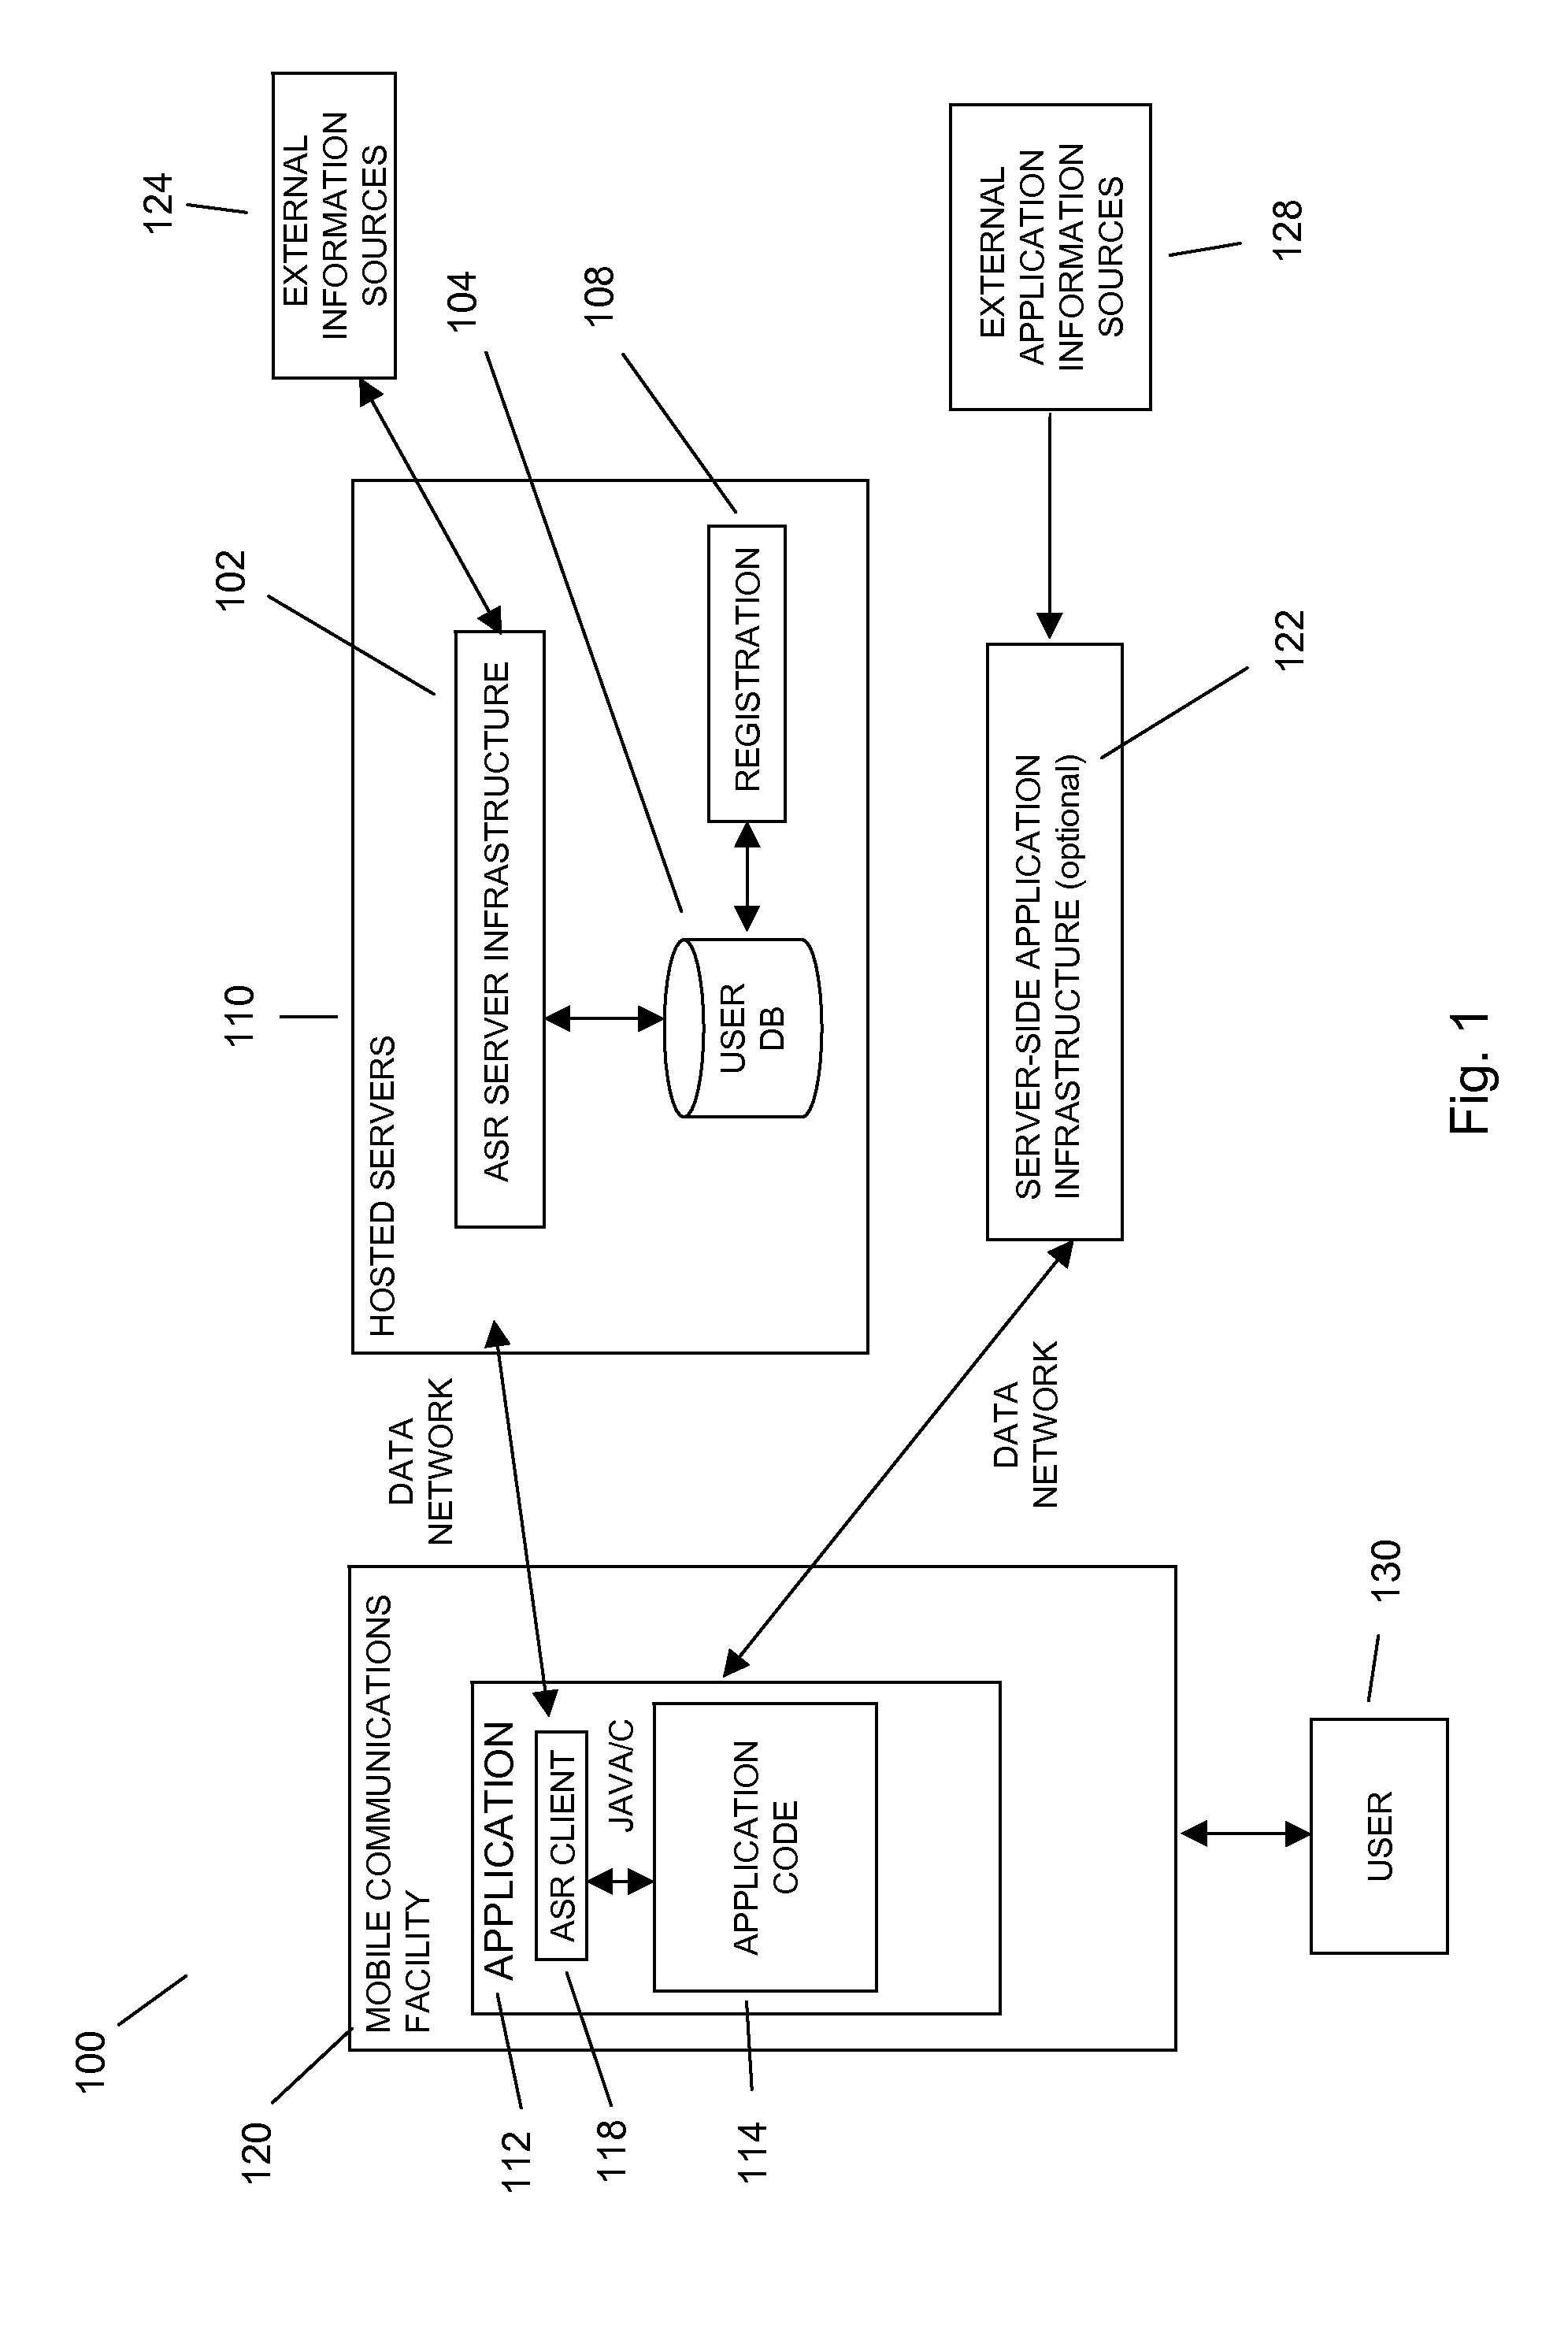 Sending a communications header with voice recording to send metadata for use in speech recognition and formatting in mobile dictation application